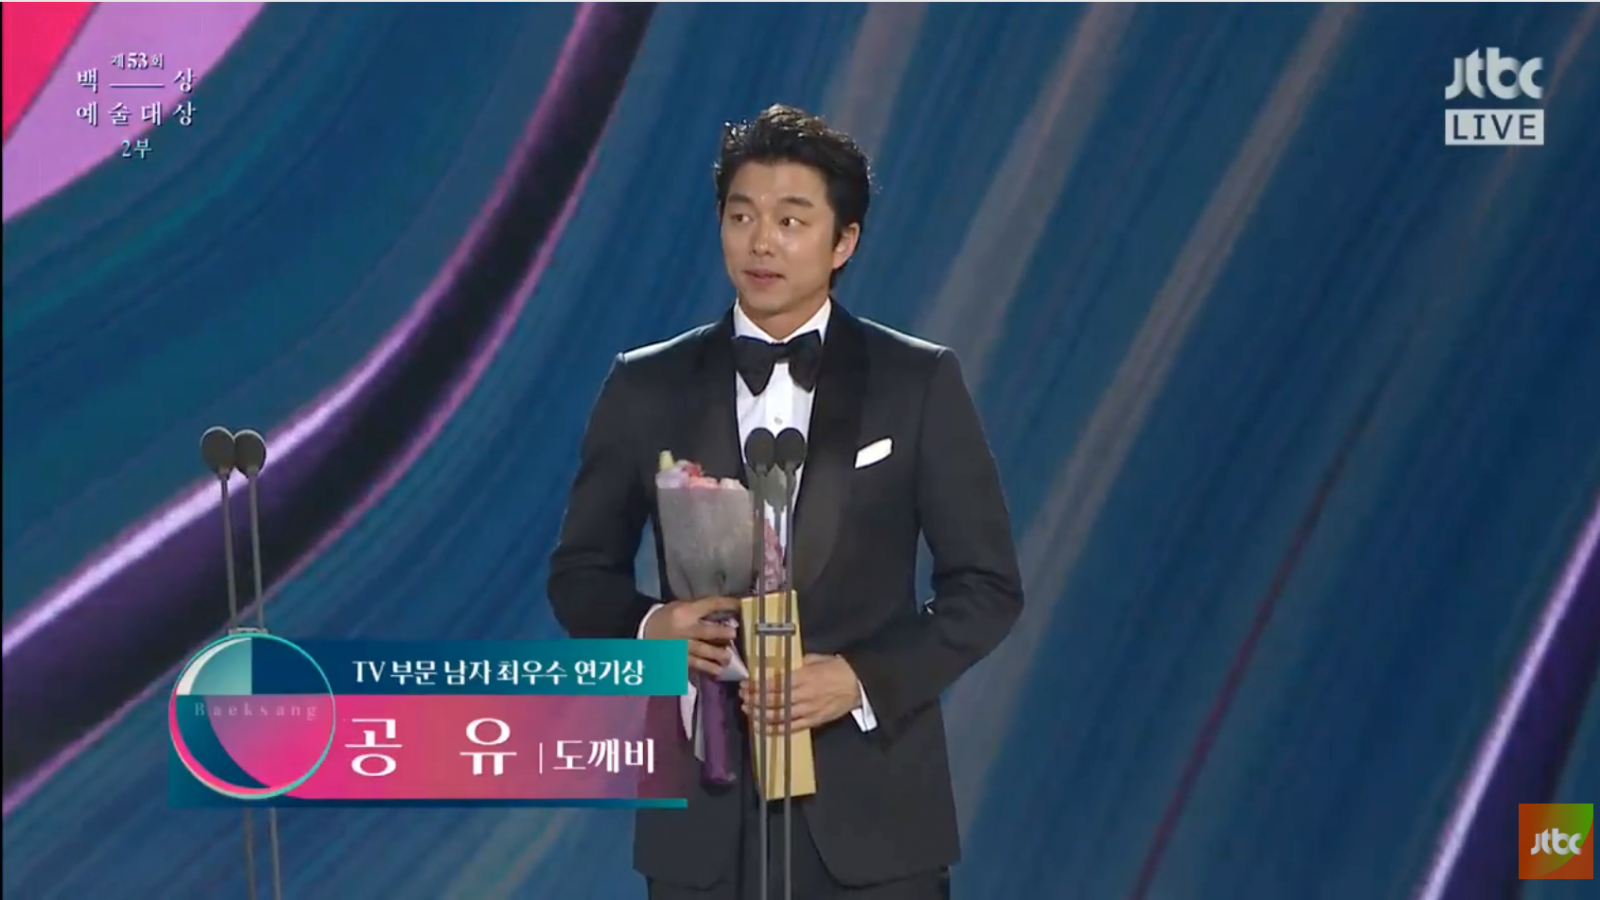 Gong Yoo Can’t Hold Back His Tear while Giving Speech on Baeksang Arts Awards